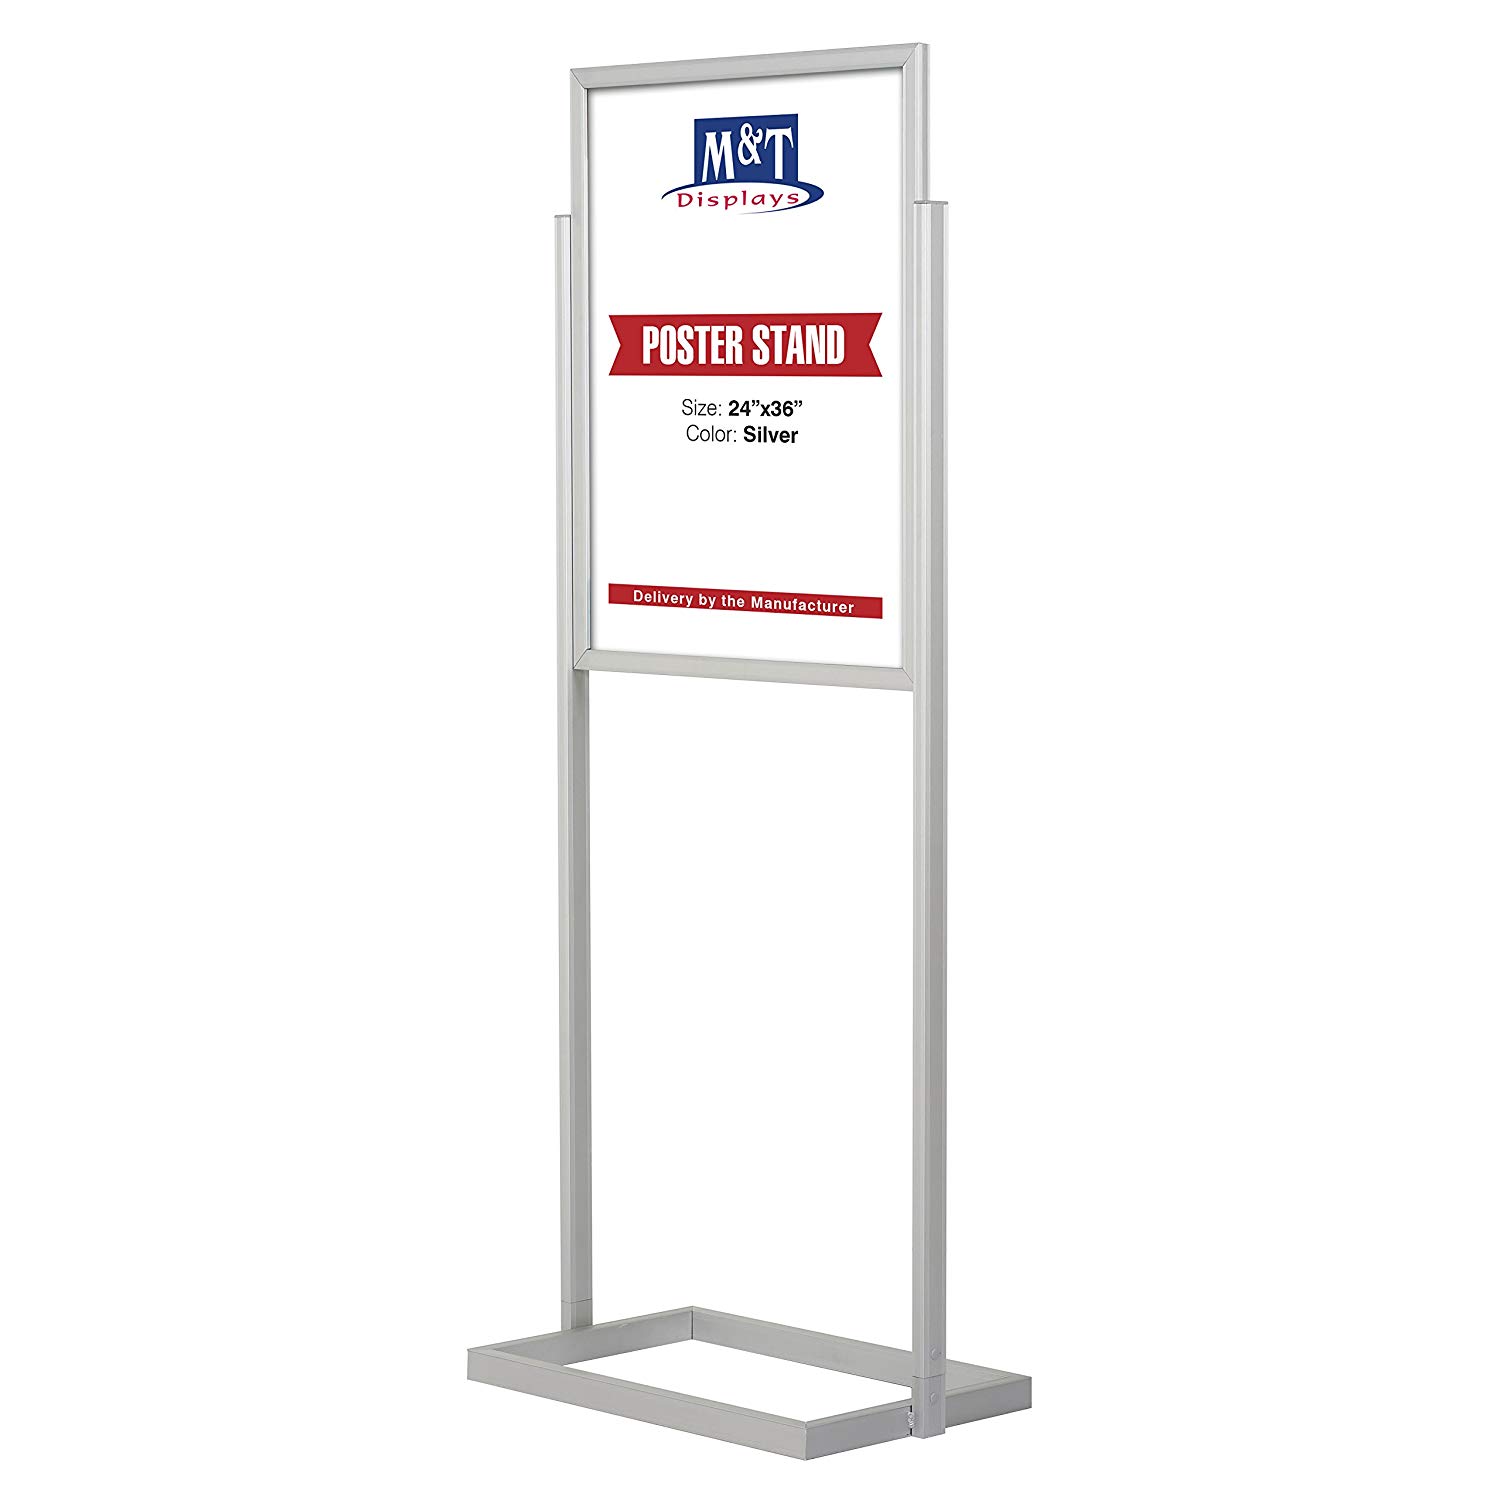 MT Displays Eco Info Board Display Stand Holder for Floor Double Sided,  24x36 Poster Size, Silver, Tier, Double Sided